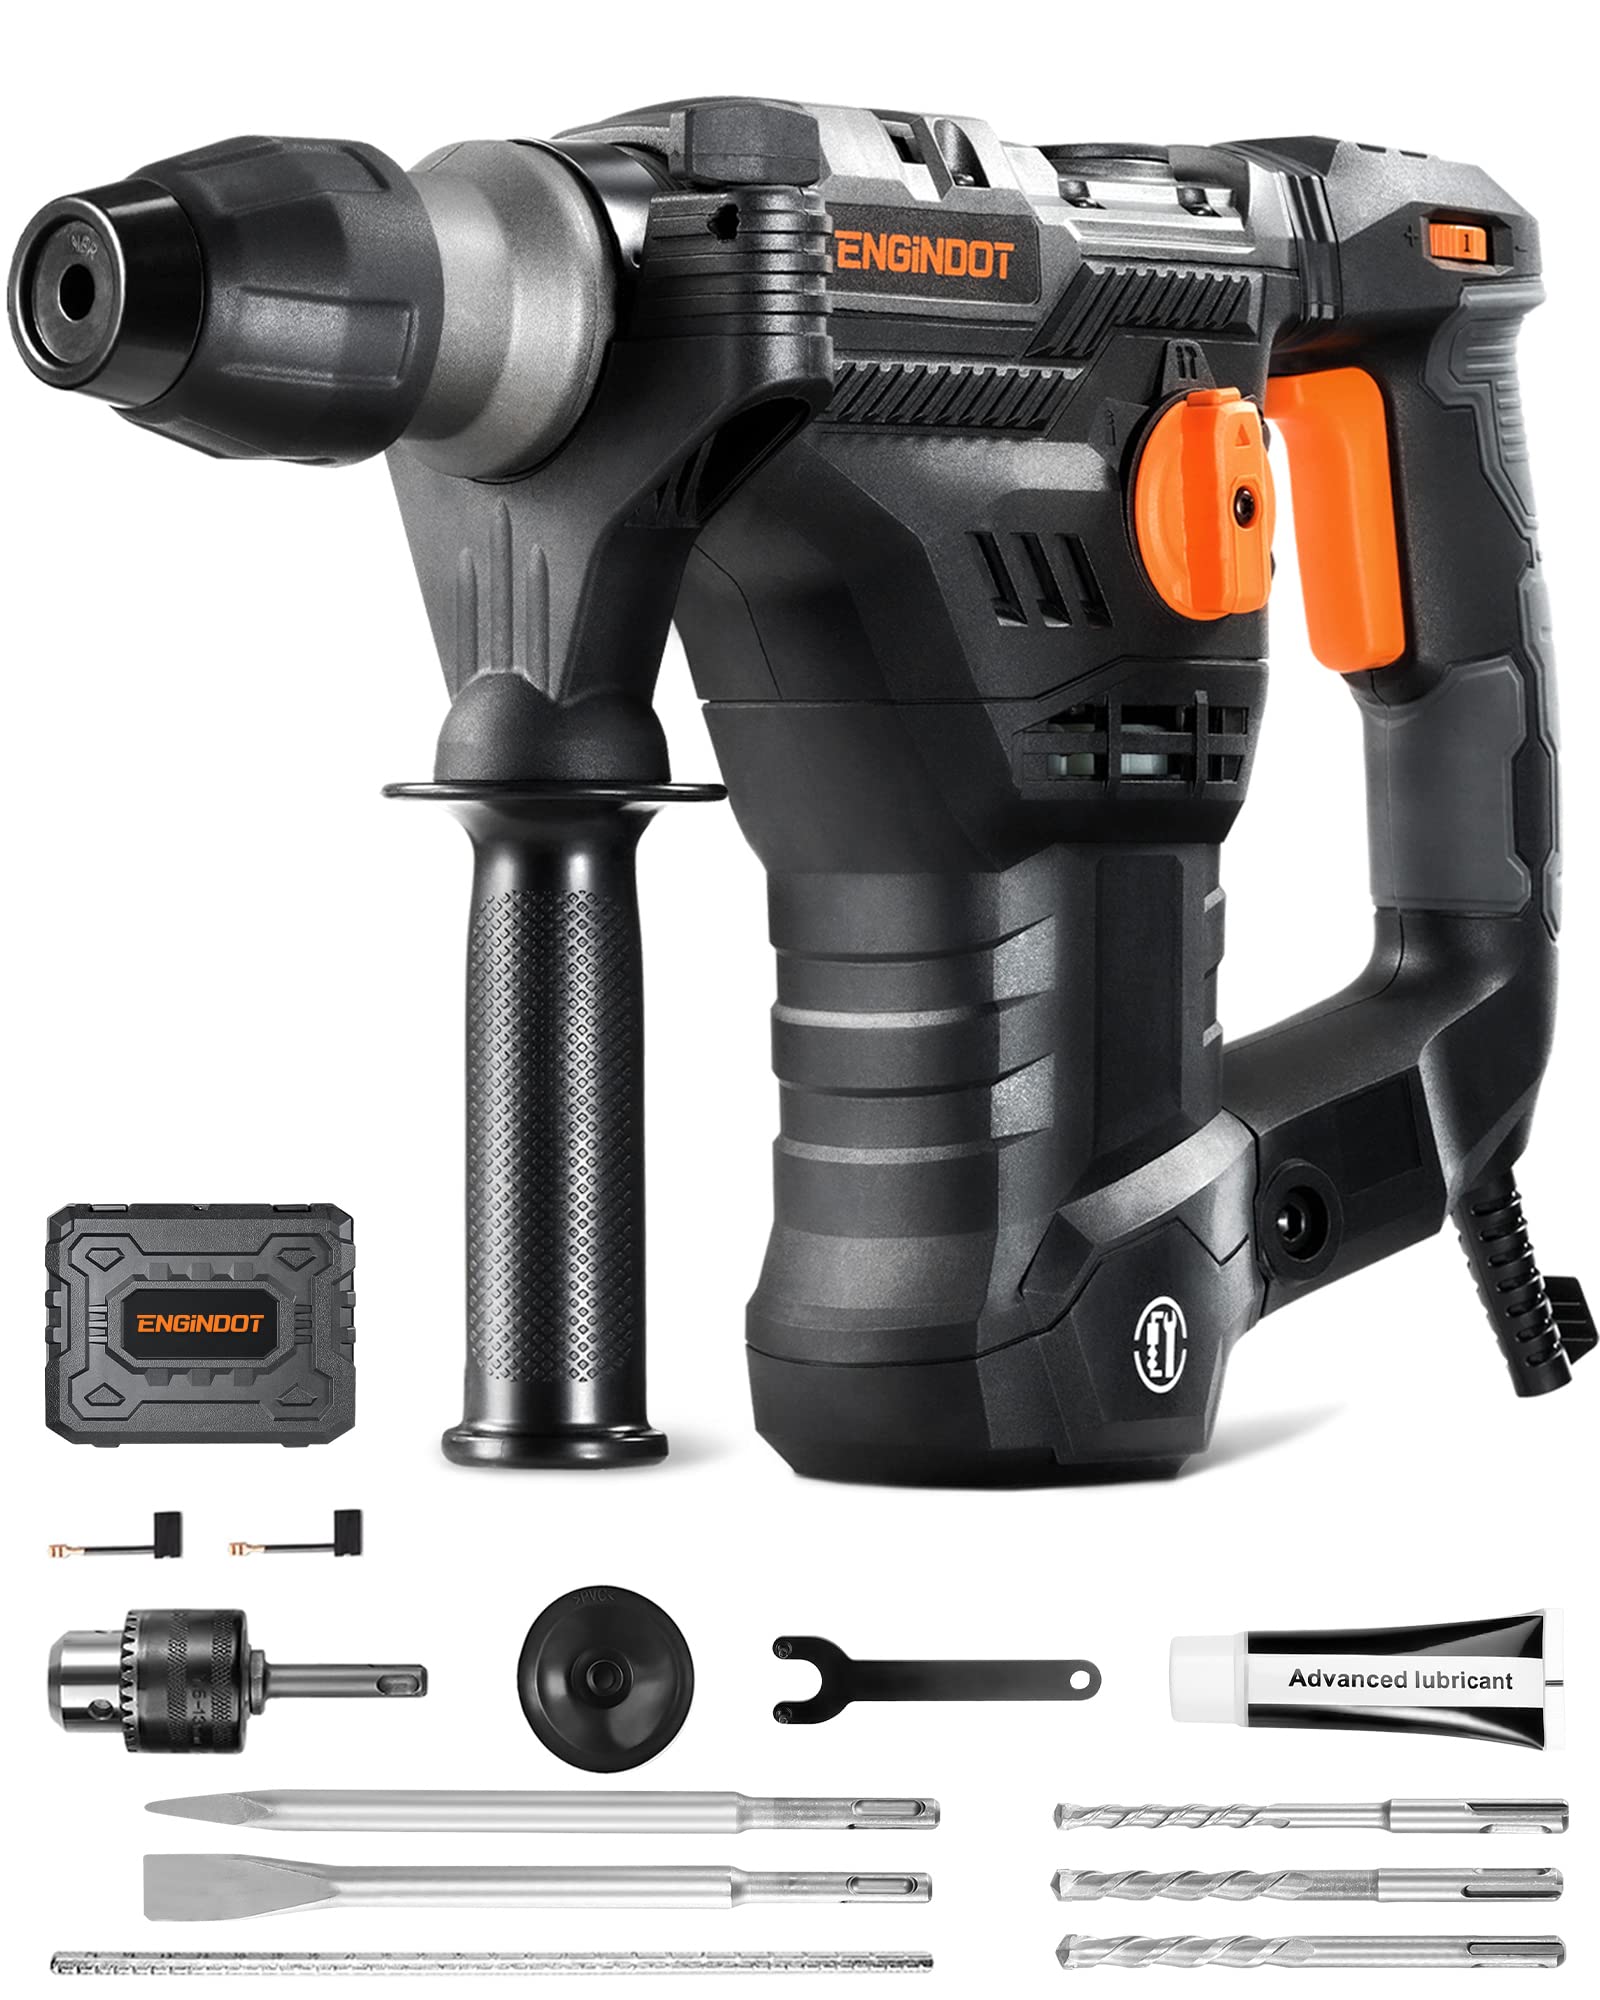 ENGiNDOT 1-1/4 Inch SDS-Plus Rotary Hammer Drill, 12.5 Amp 4350 BPM 900 RPM 4 Modes 7 JOULES Heavy Duty Hammer Drill with Safety Clutch, Drill Chuck - TRH01A